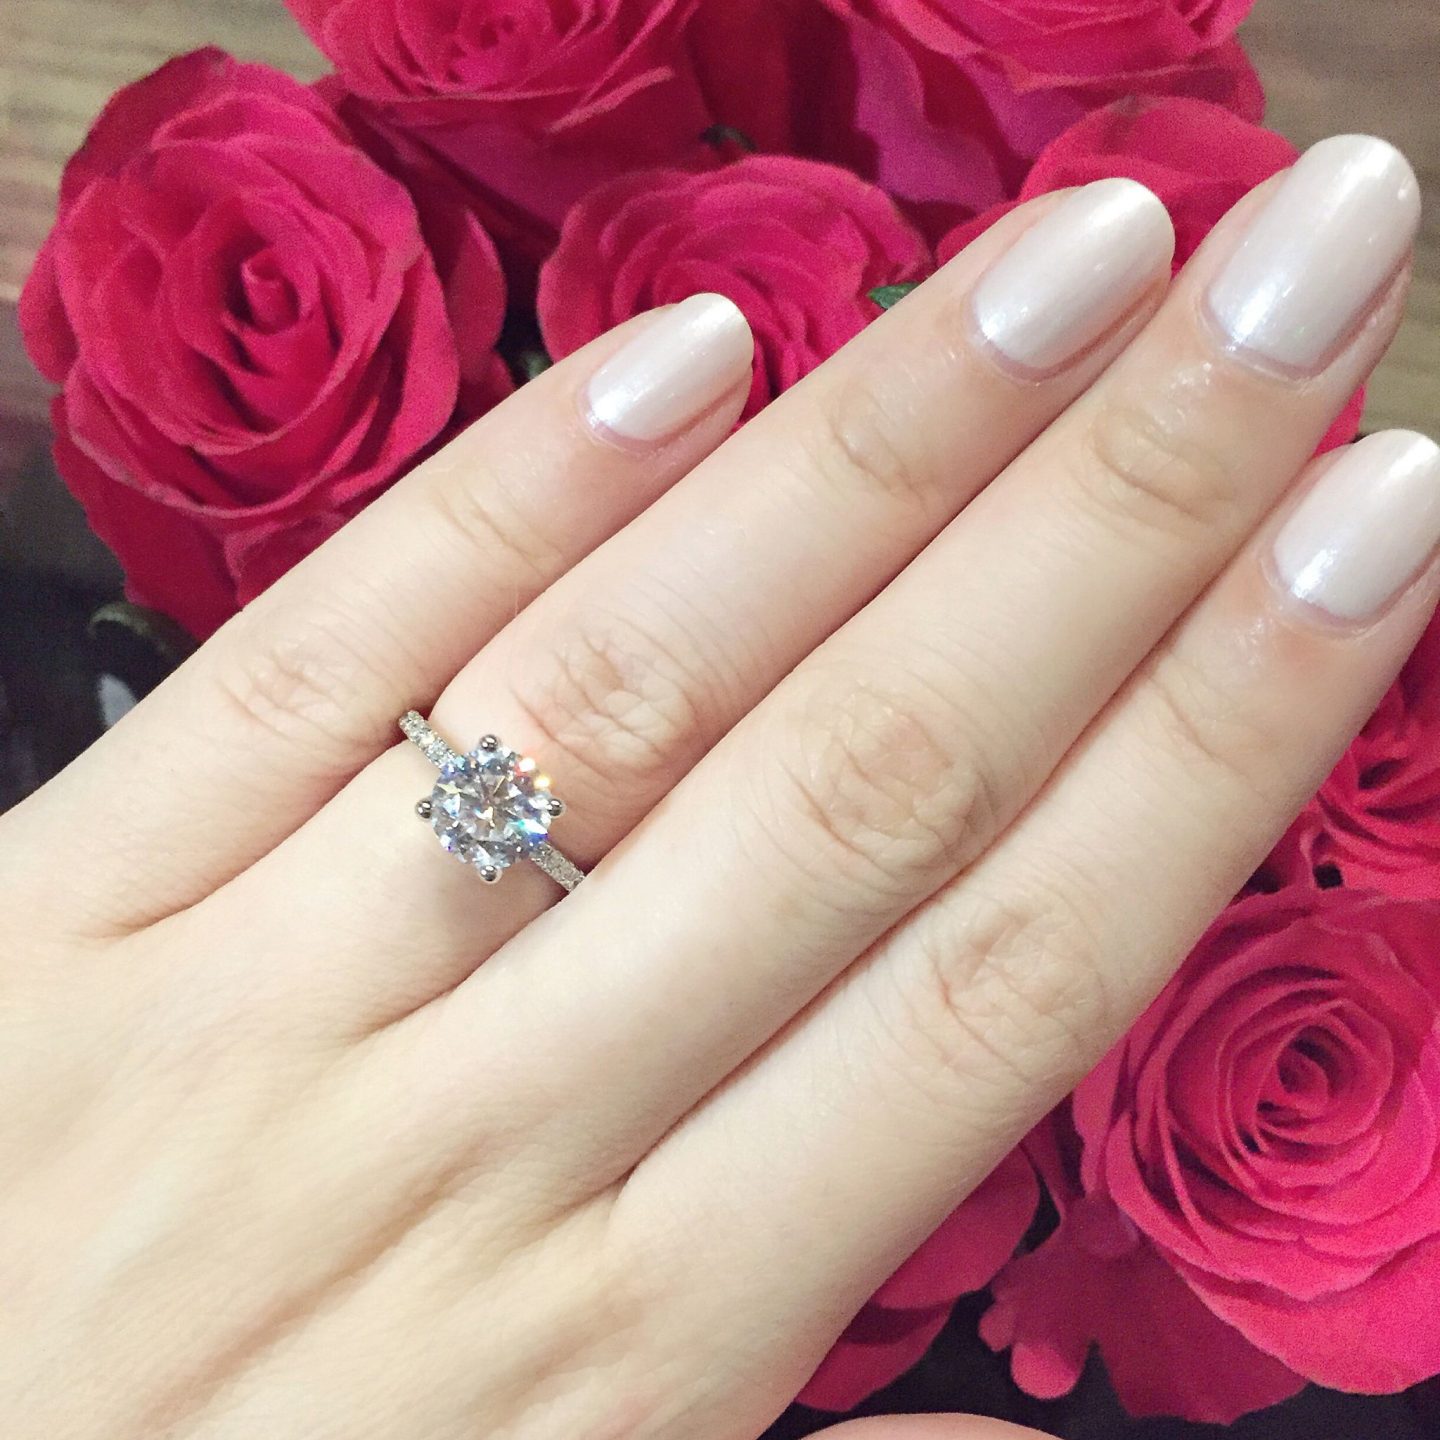 The Prettiest Pink 'Engagement Ring' Nail Polishes! - Chase Amie